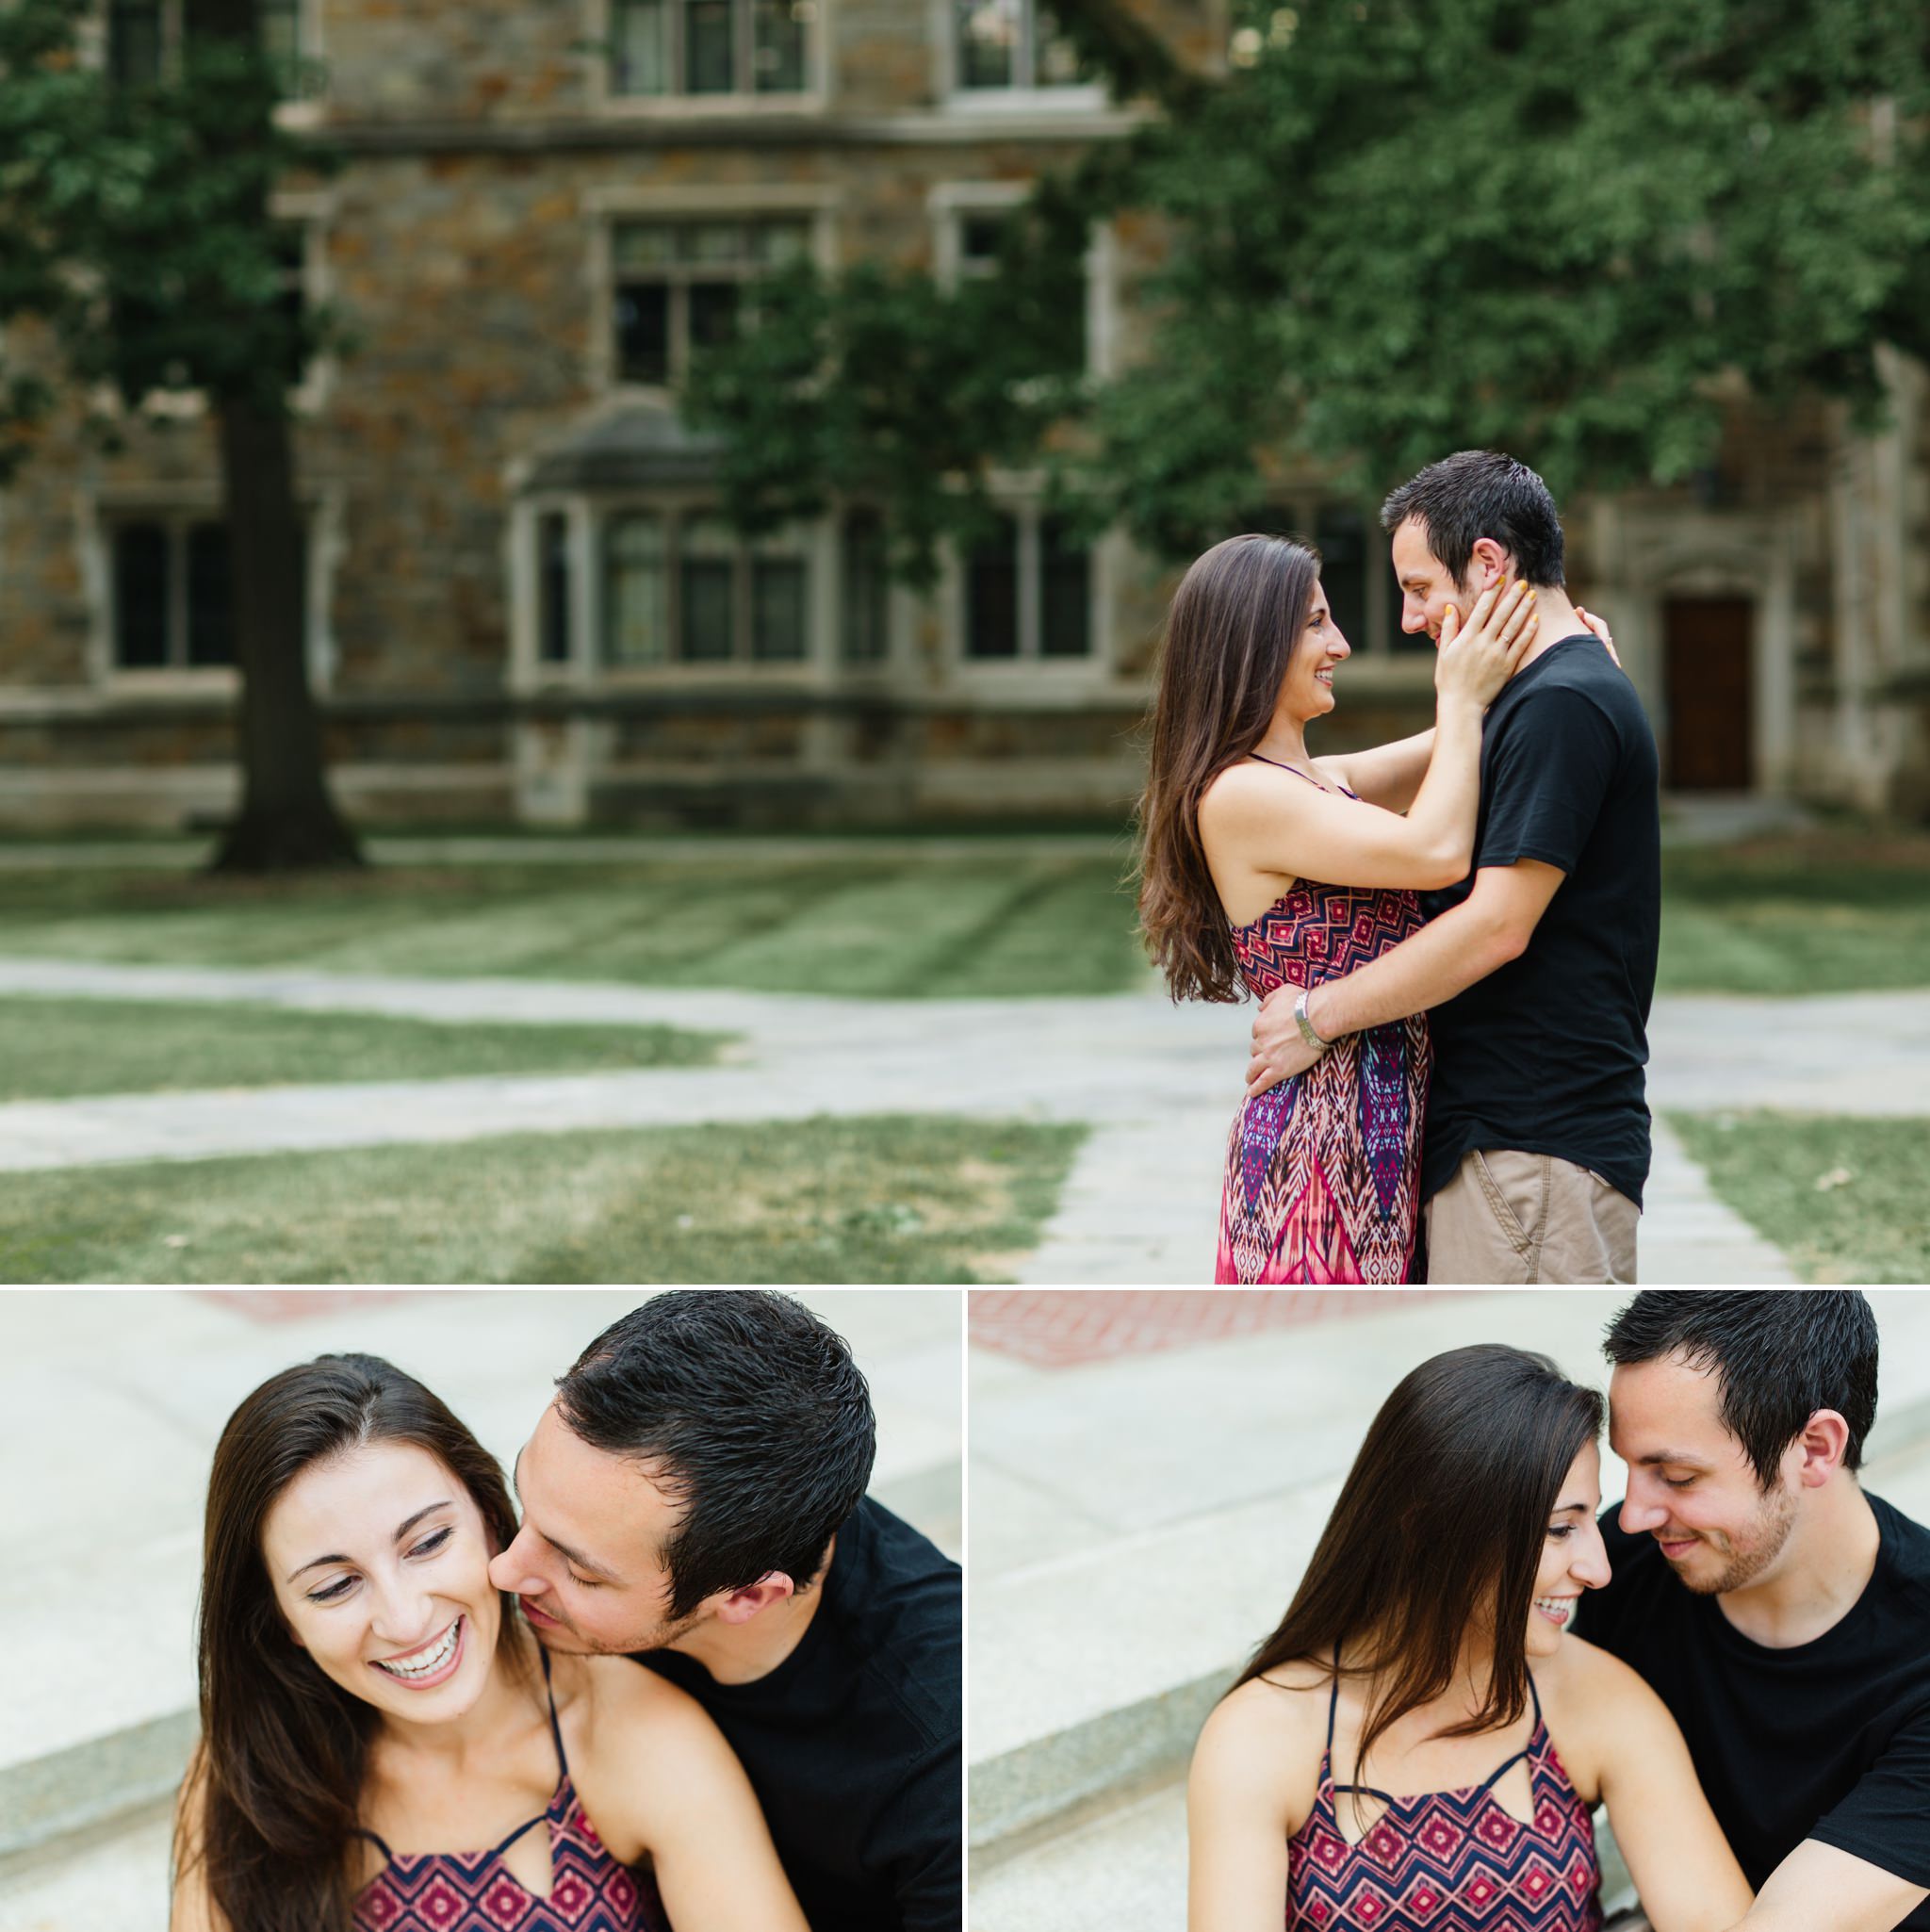 mary-and-sean-ann-arbor-engagement-session-2